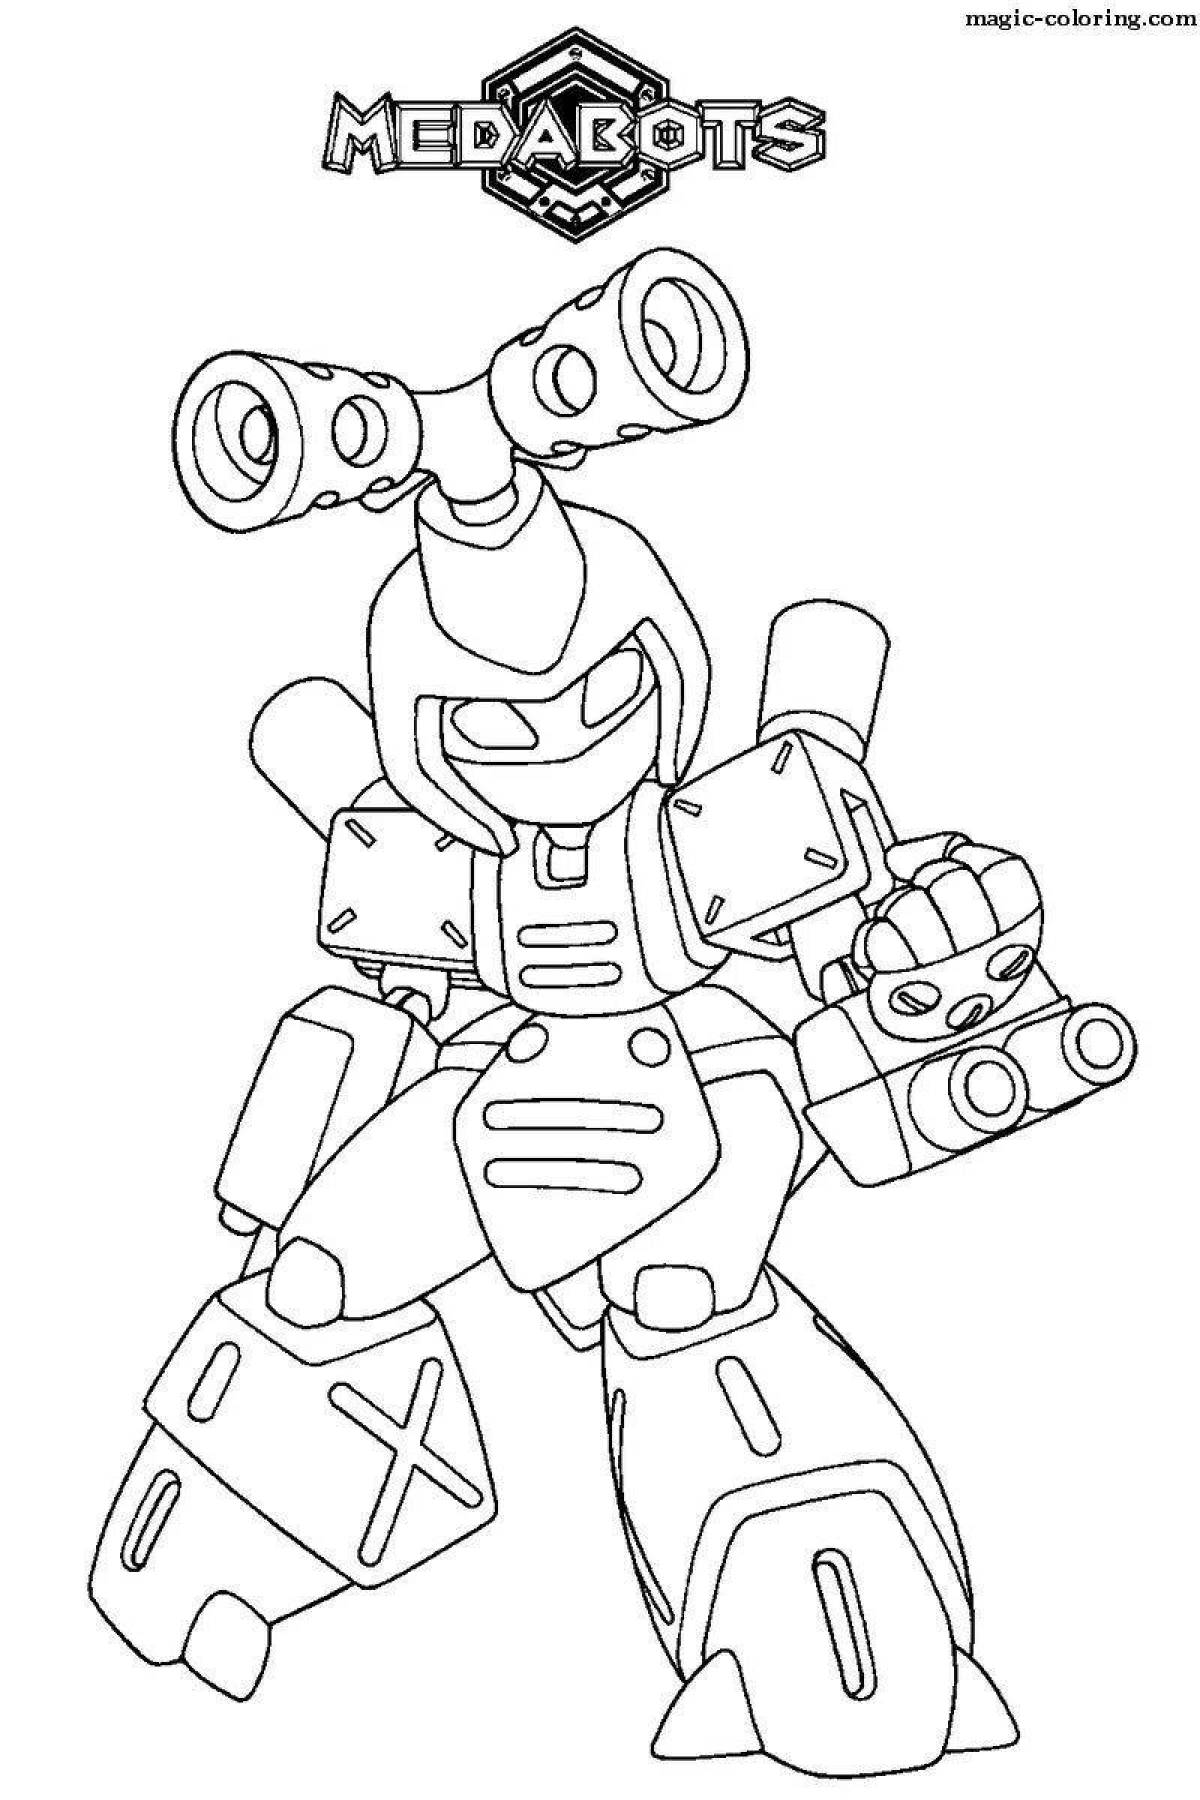 Colored explosive bots coloring pages